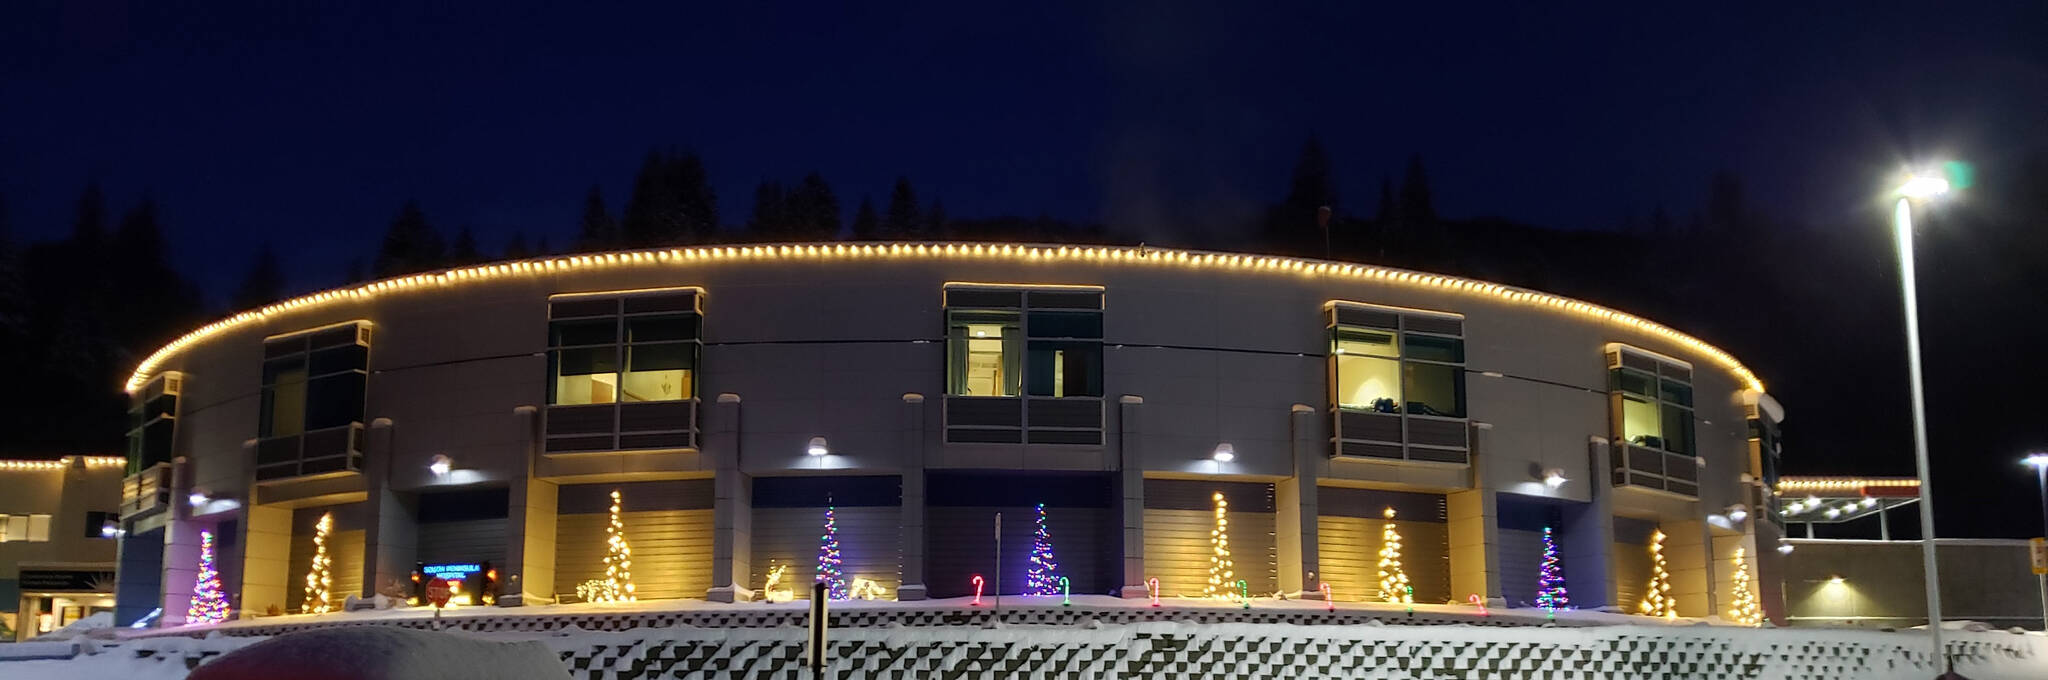 Lights decorate the patient wing of South Peninsula Hospital on Nov. 30, 2021, in Homer, Alaska. (Photo courtesy South Peninsula Hospital)